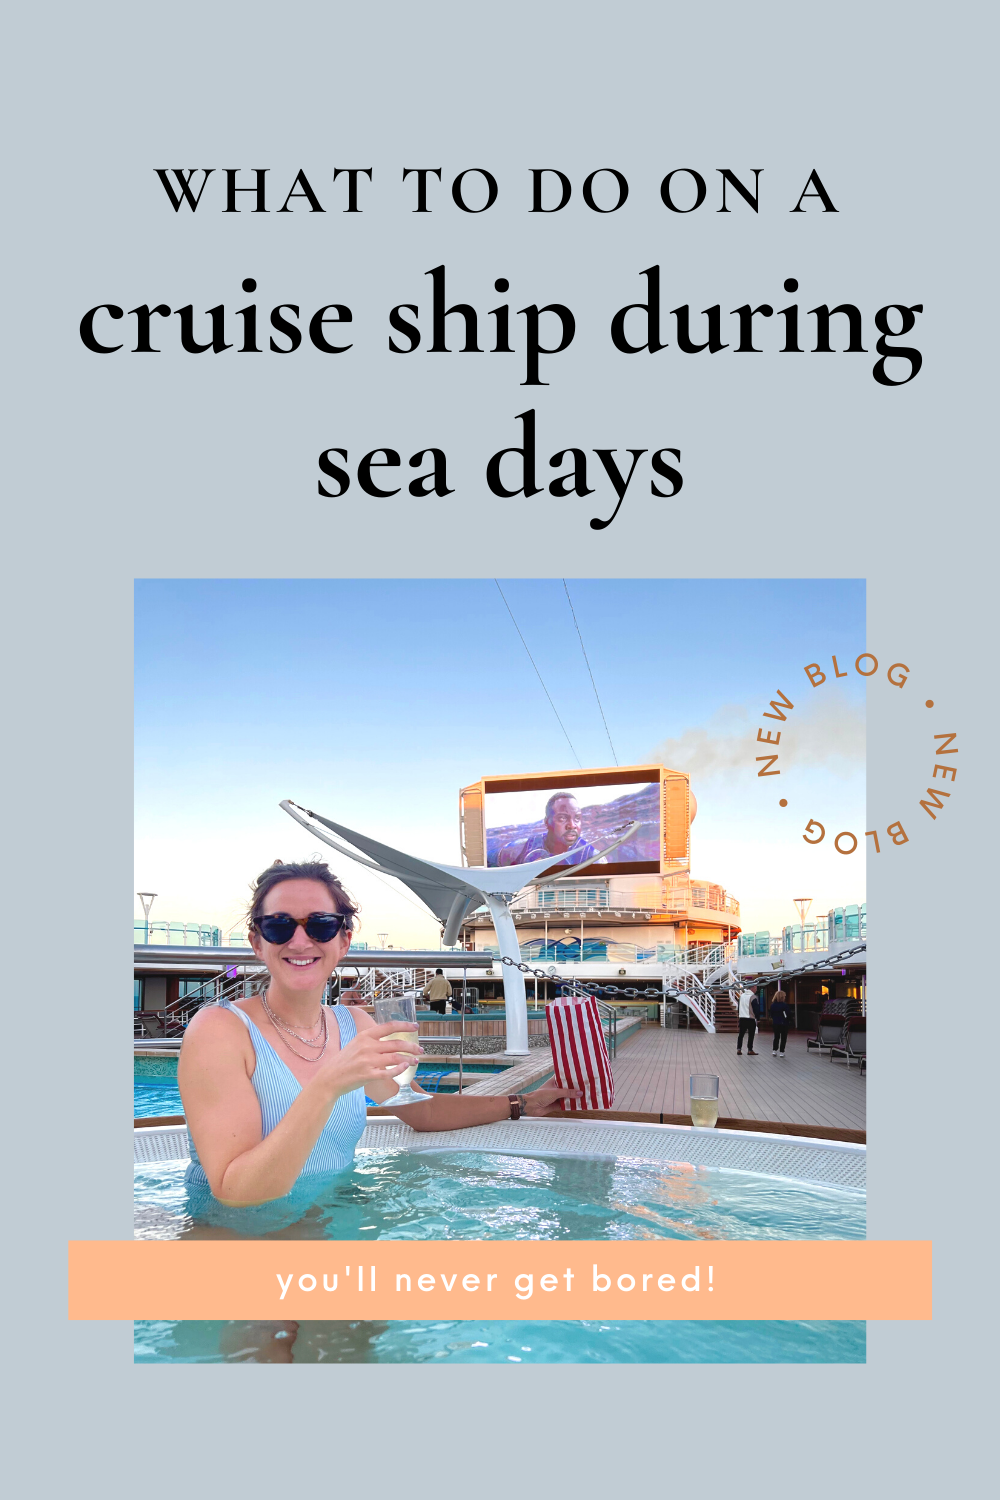 10 things to do on a cruise ship during sea days